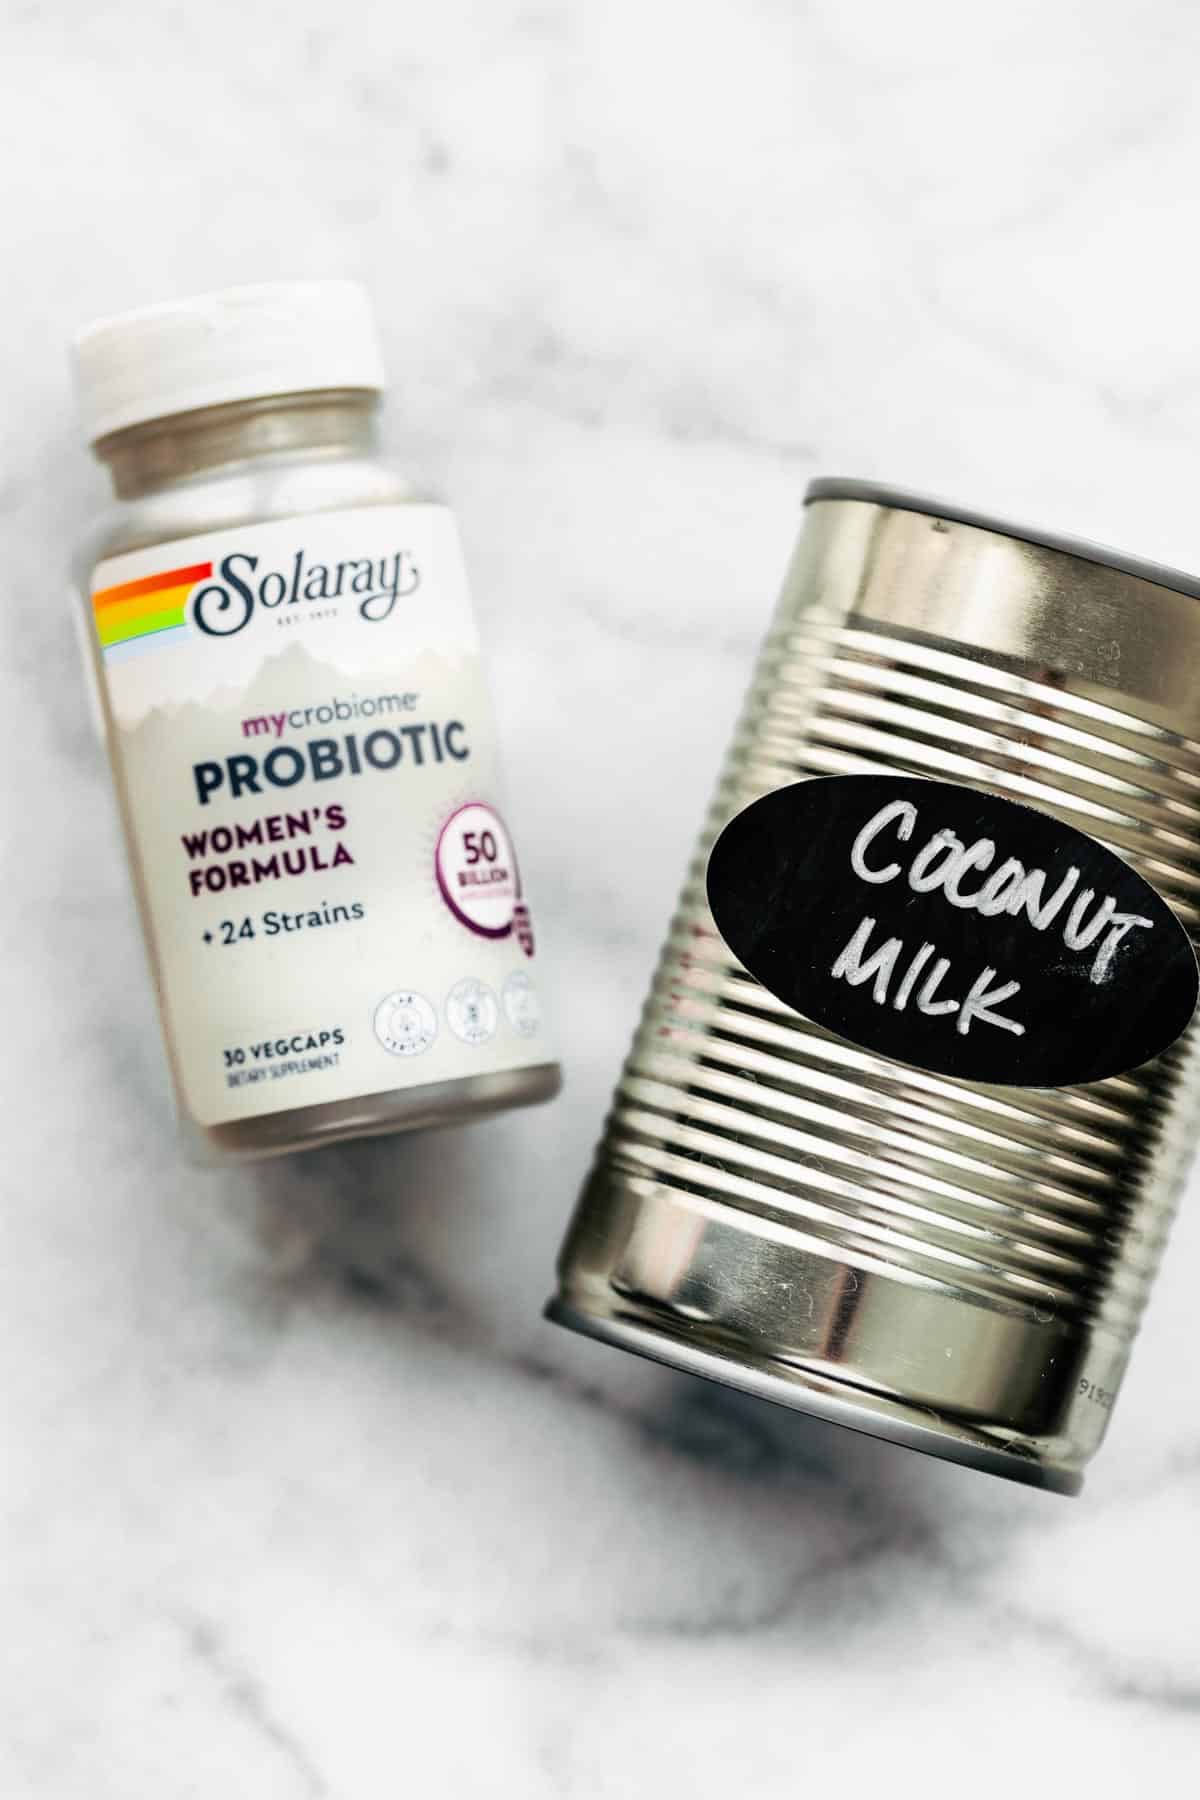 A bottle of mycrobiome women's probiotics and a can of coconut milk.